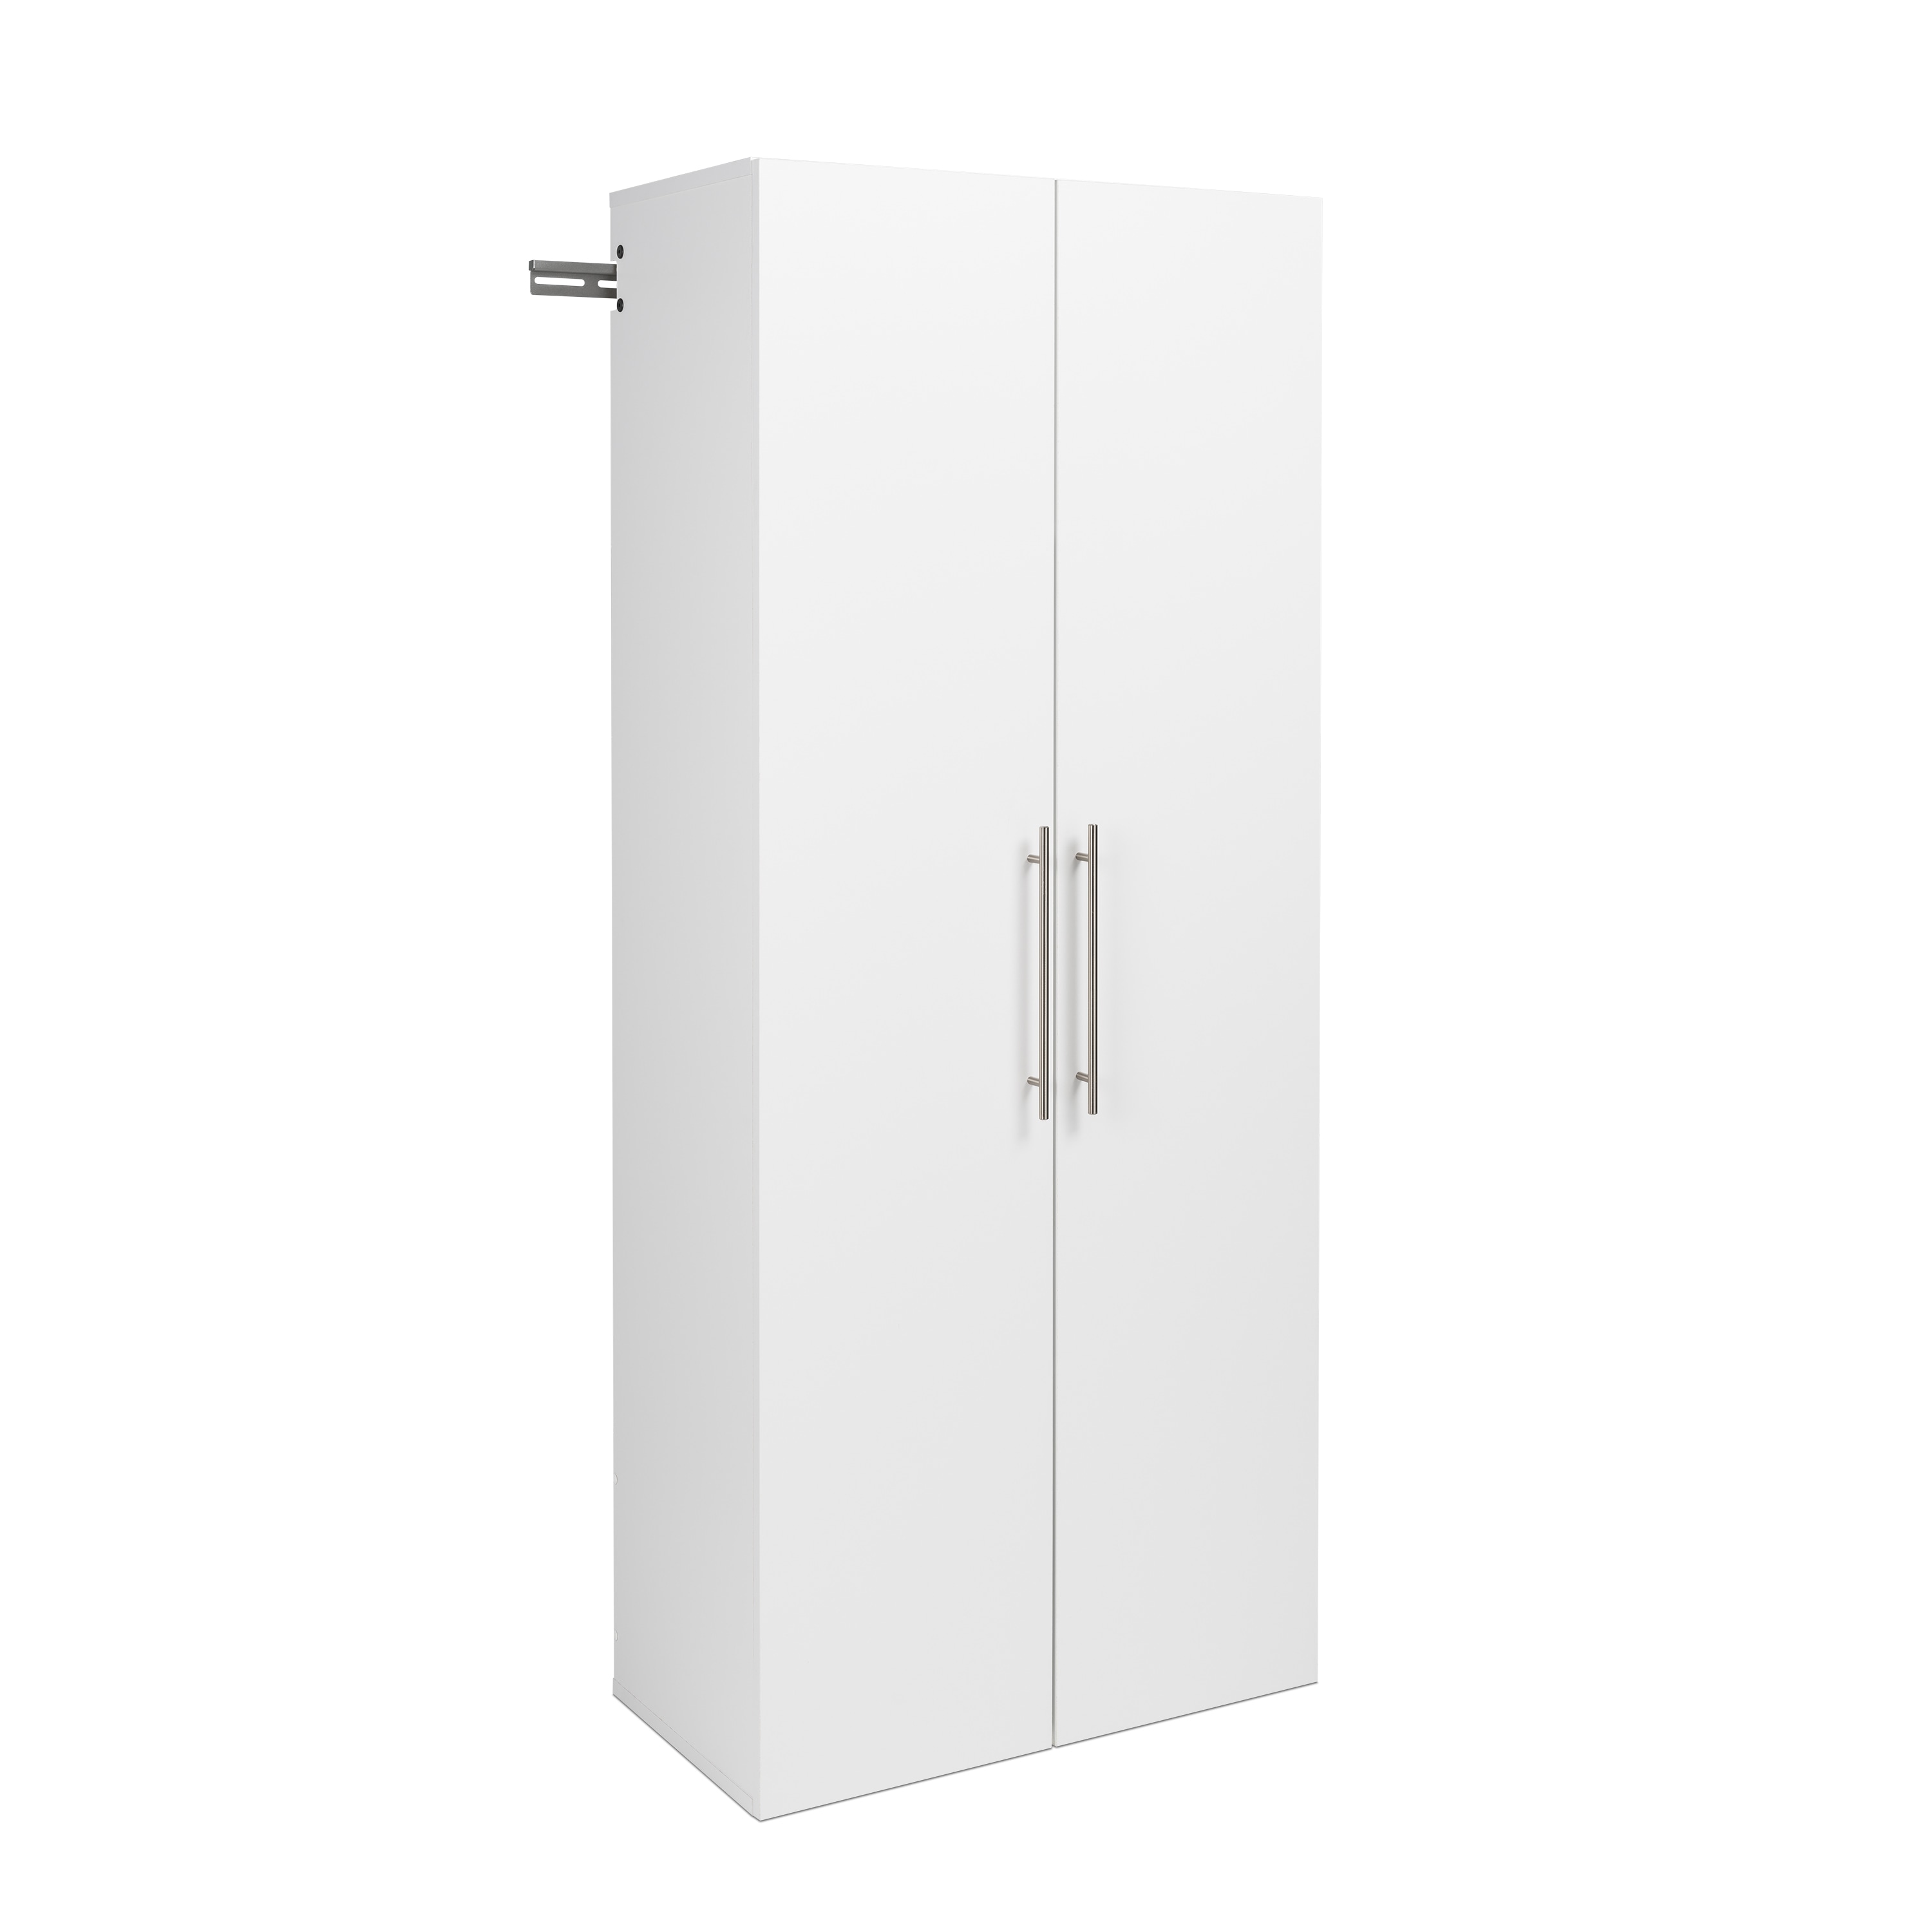 Achyut 26.93 H x 23.46 W x 15.35 D Wall Cabinet with Hanging Rod WFX Utility Finish: White